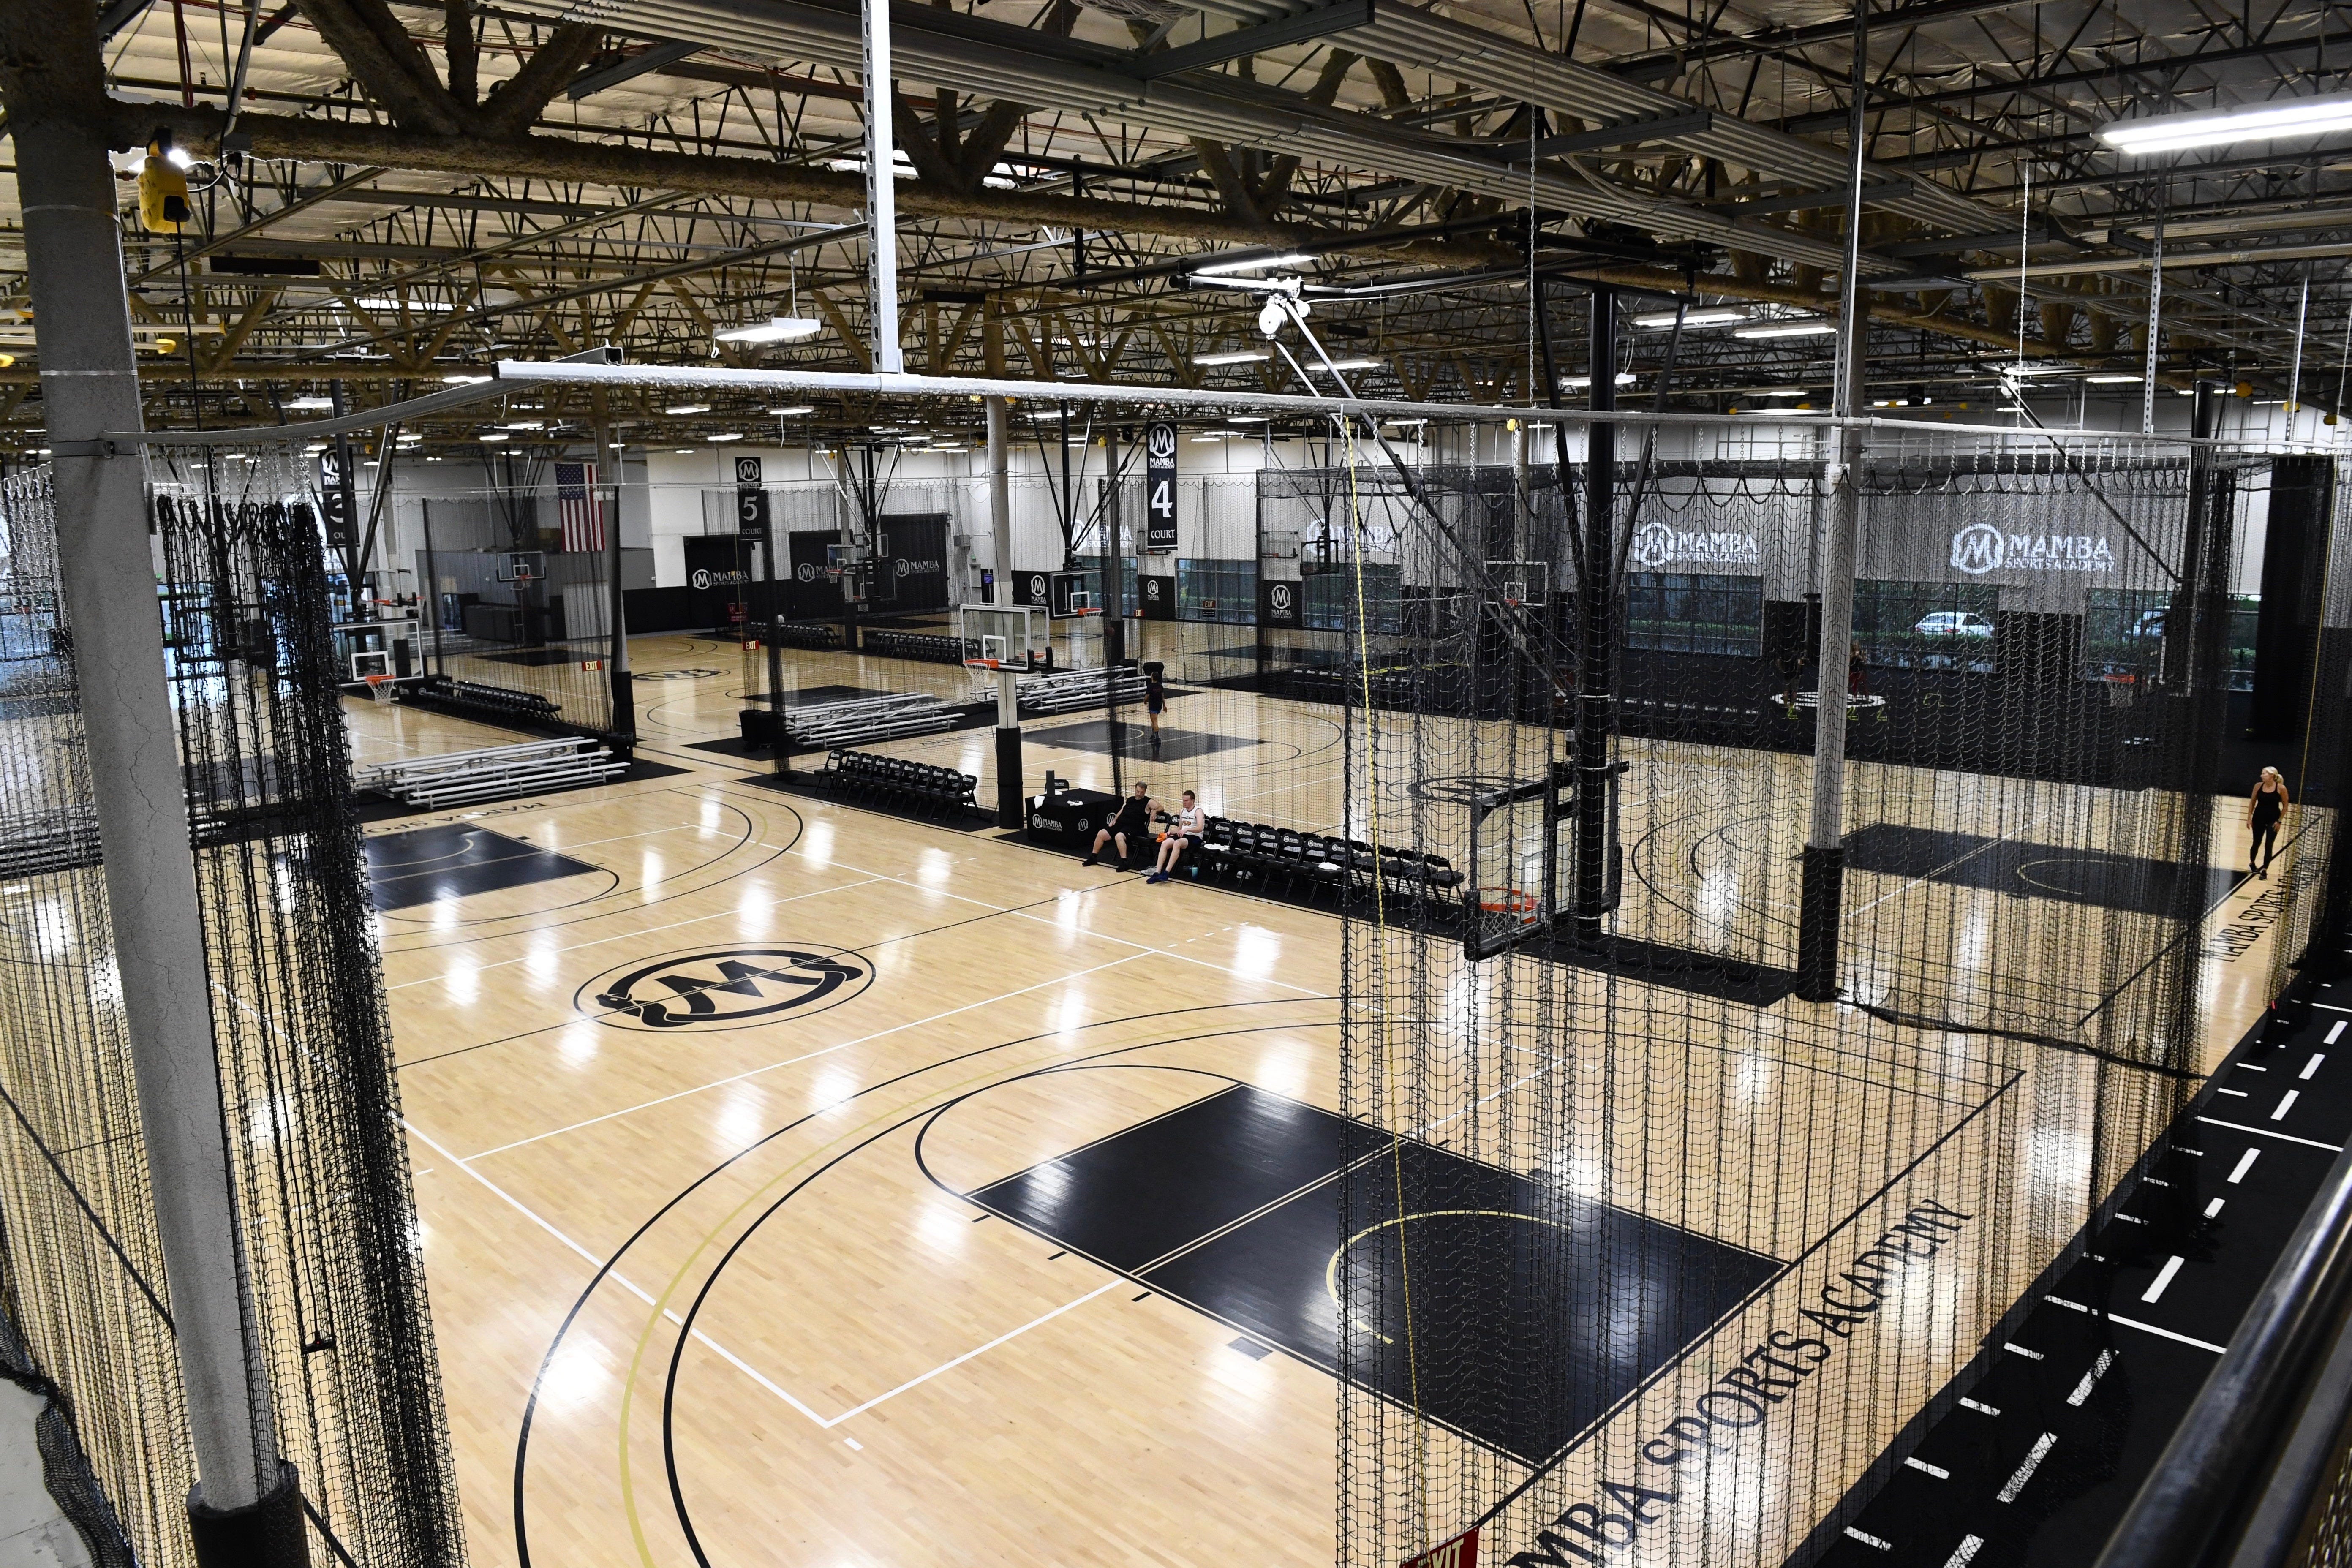 A basketball court at the Sports Academy.